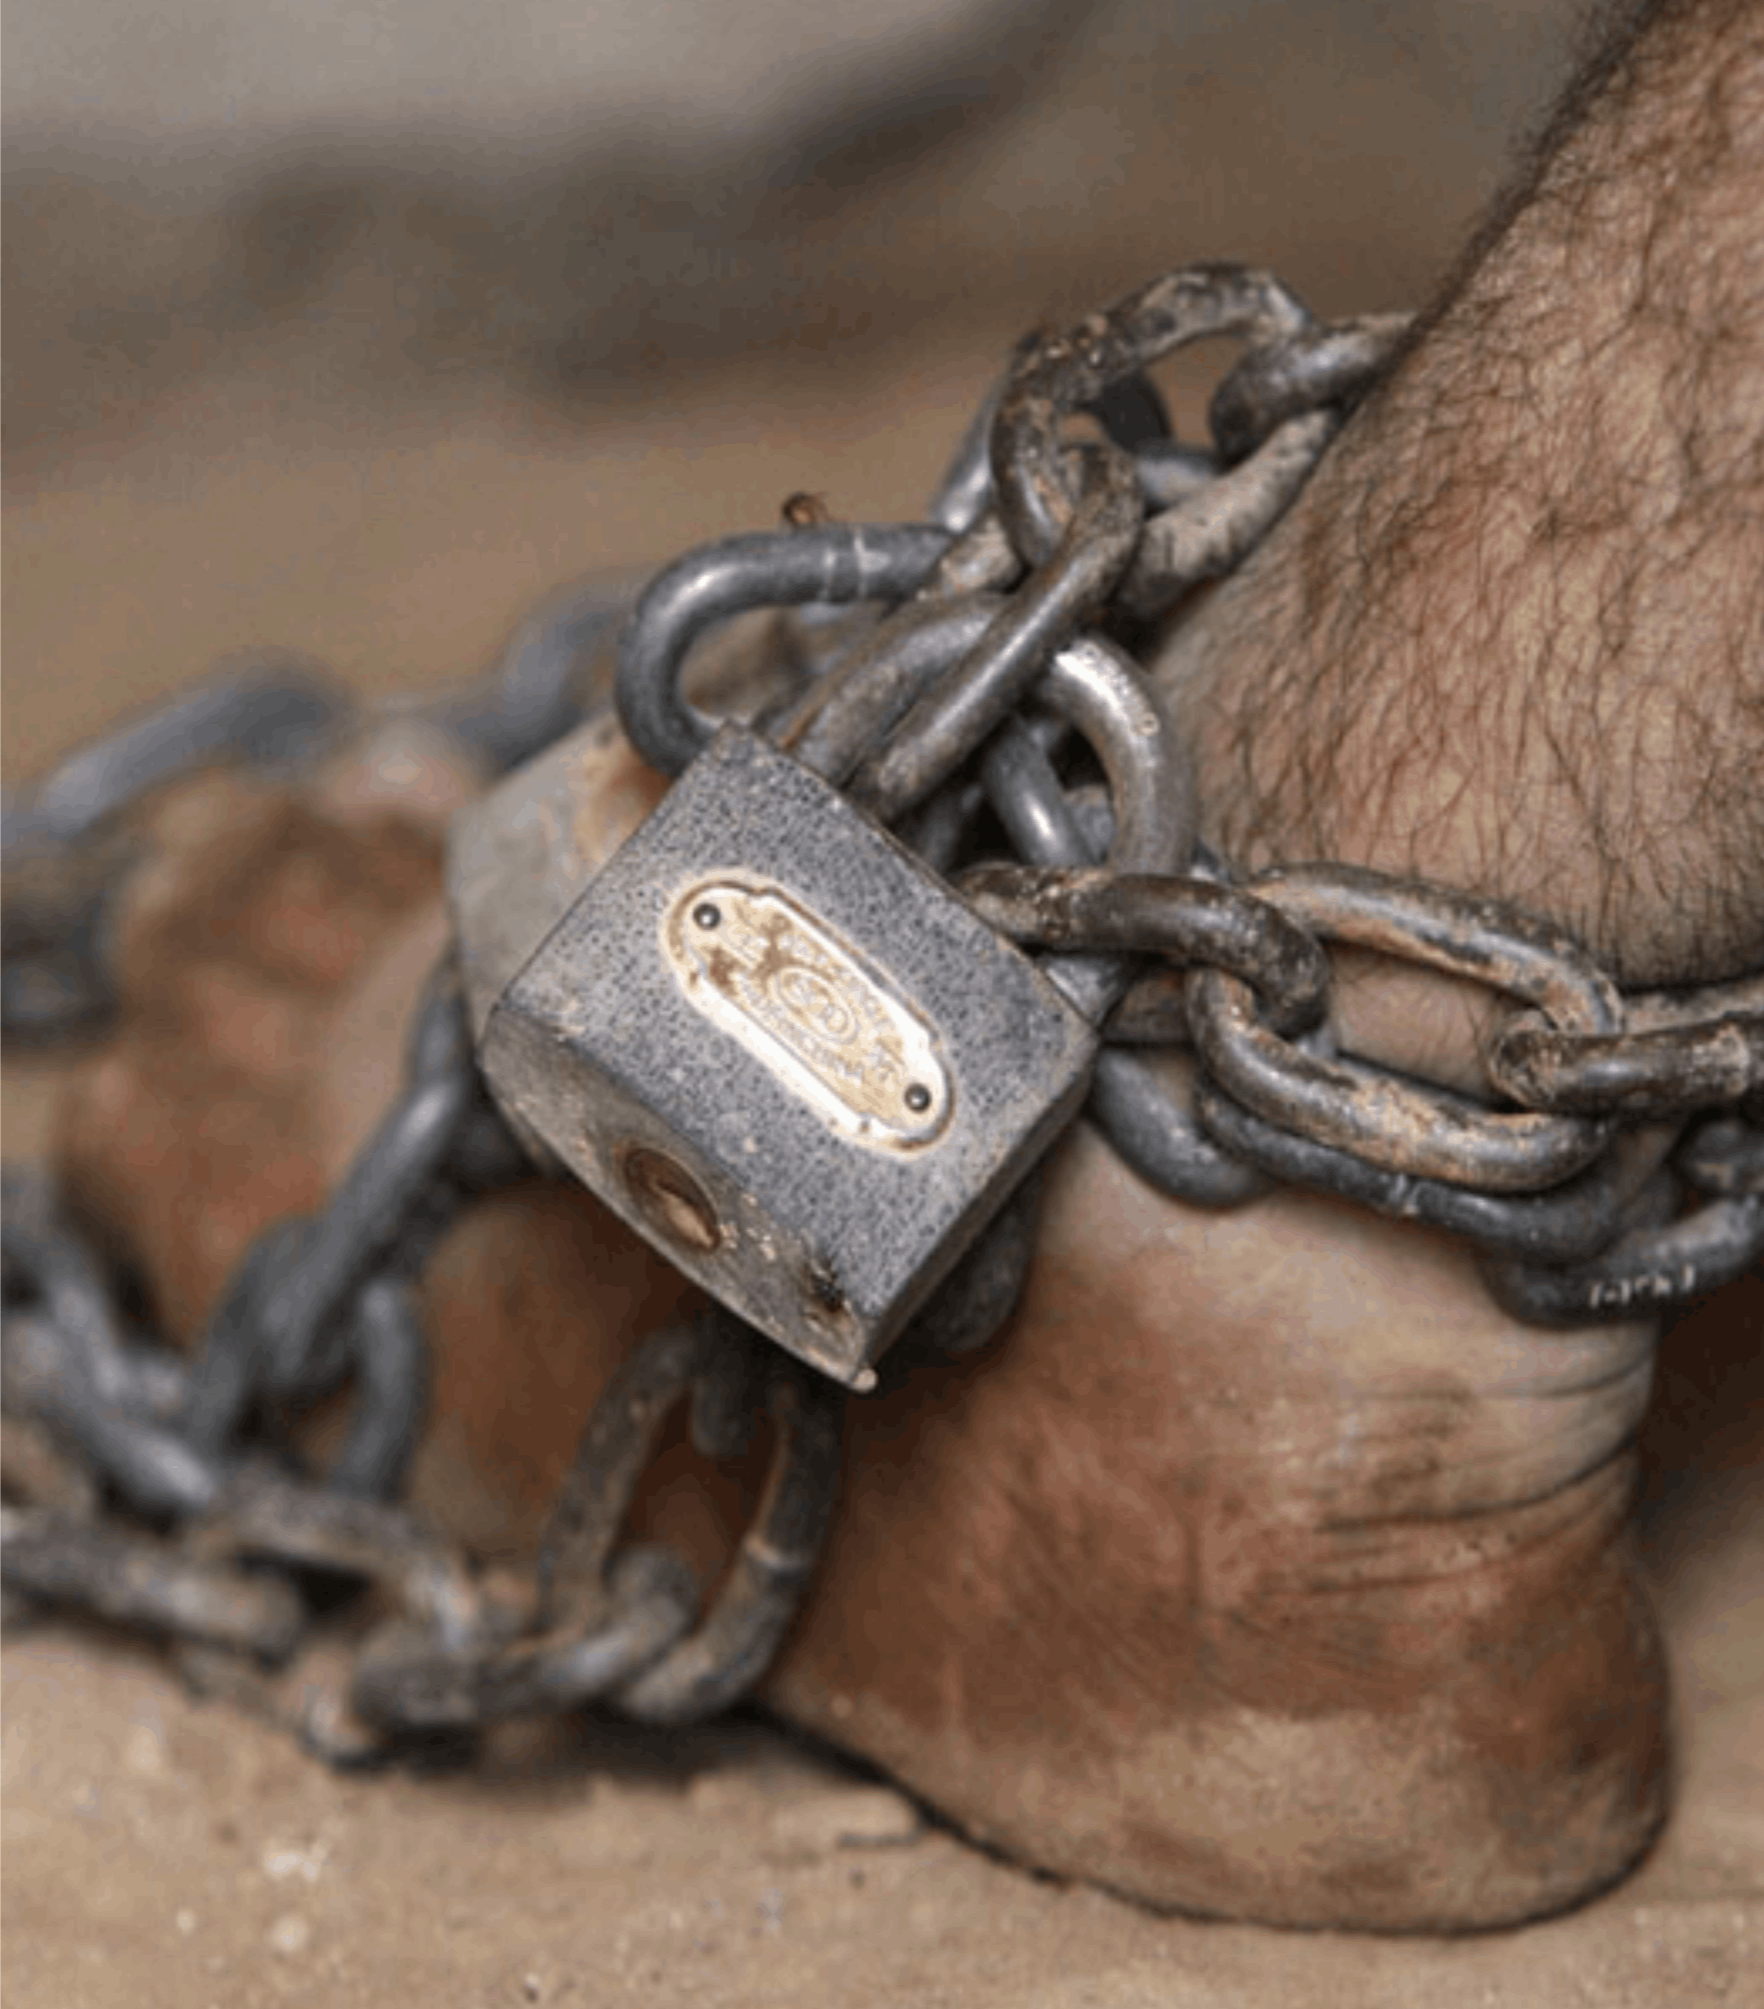 A Chained Elderly Man was rescued in Bangalore